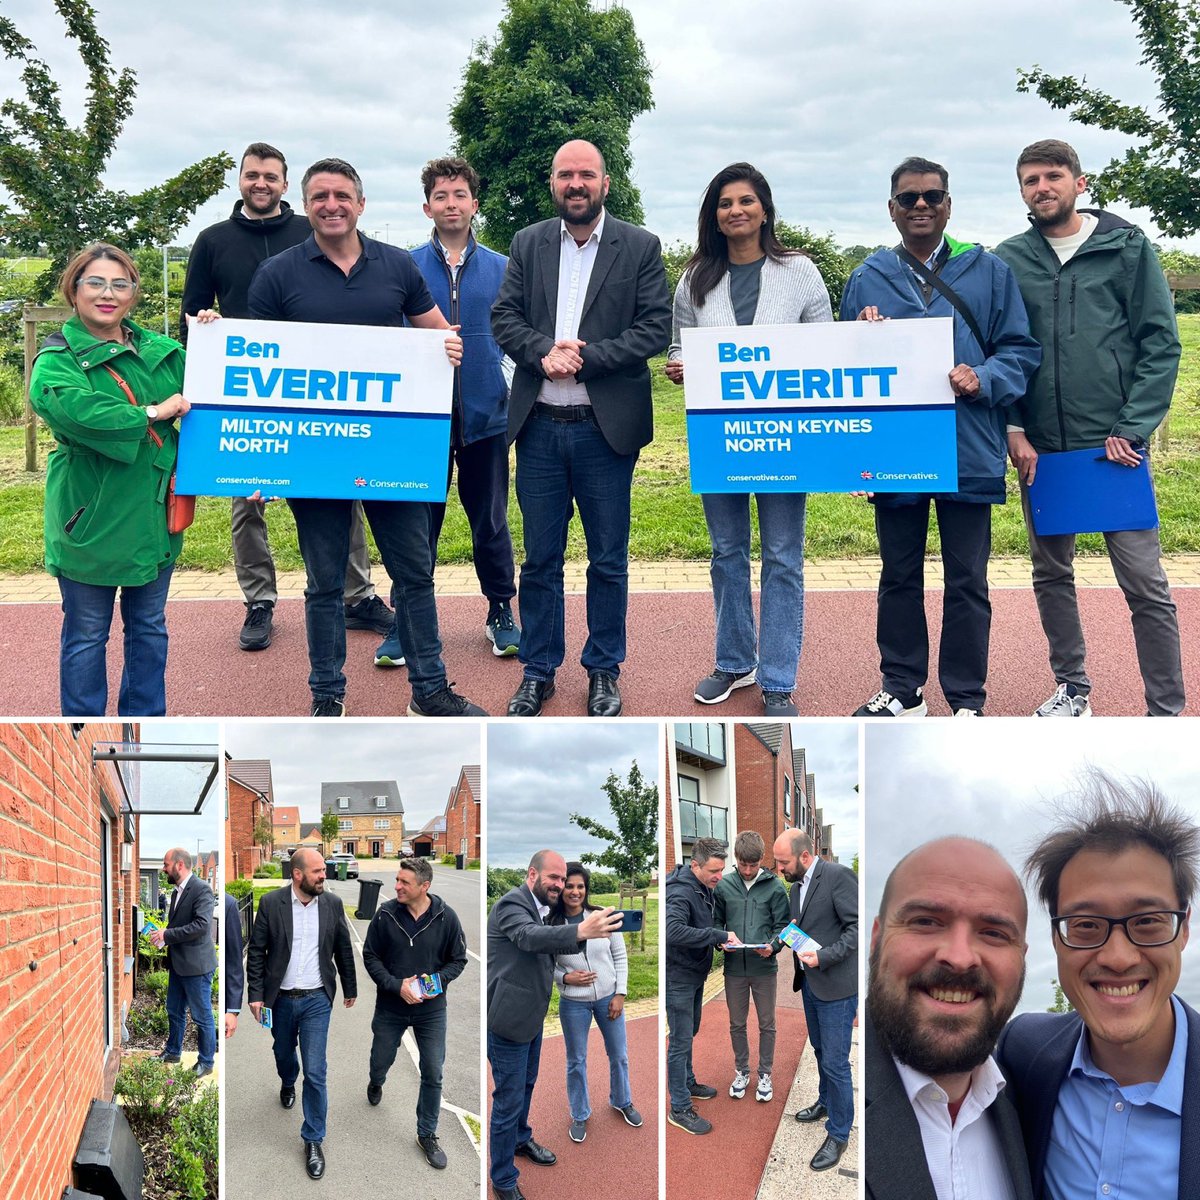 Brilliant to be back with @Ben_Everitt and his hard working local team in #MiltonKeynesNorth Yesterday, the MK team found a new activist on the doorstep and today she did her first ever canvassing session! Shout out to our #MiltonKeynesCentral candidate @Johnny_Luk too for